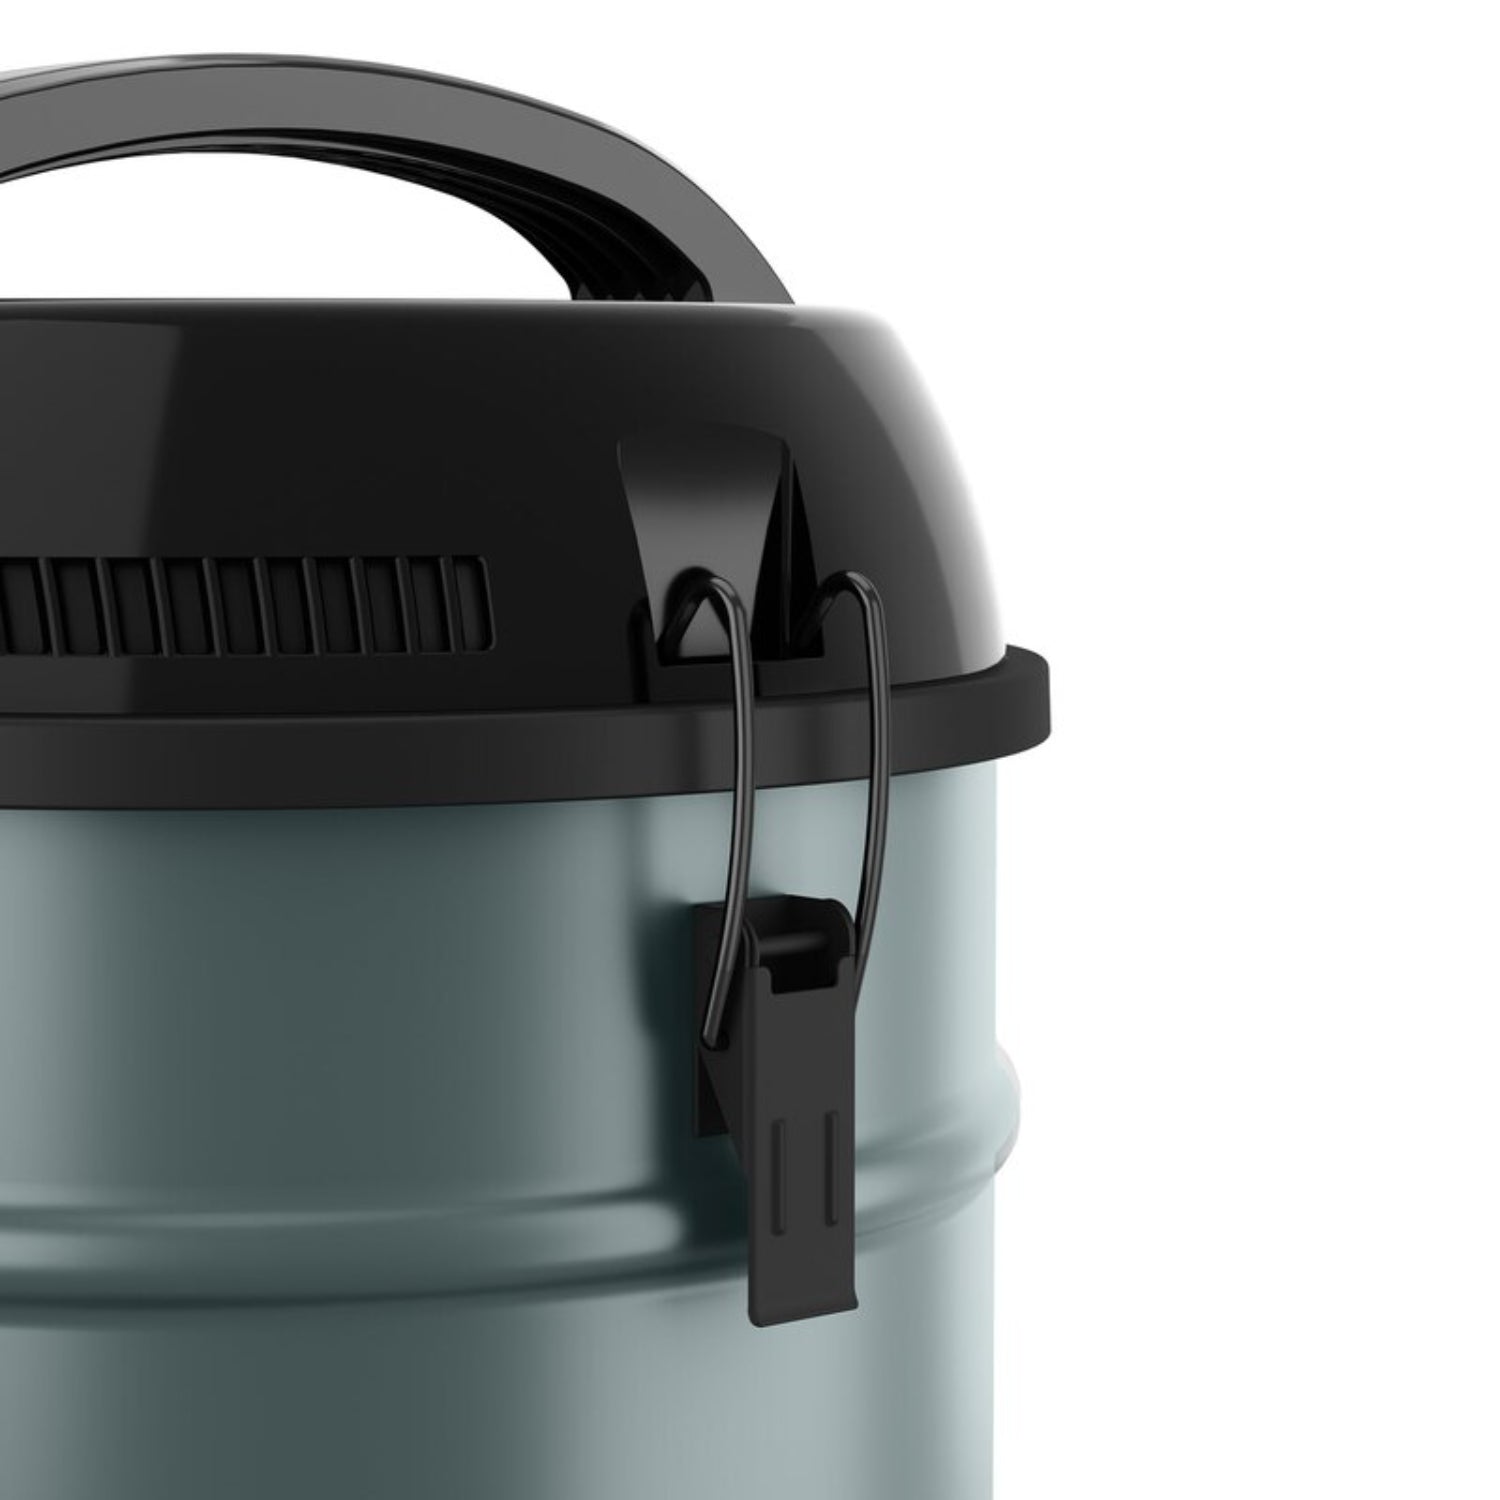 Electrolux Vacuum Cleaner with 21L Dust Bin Capacity